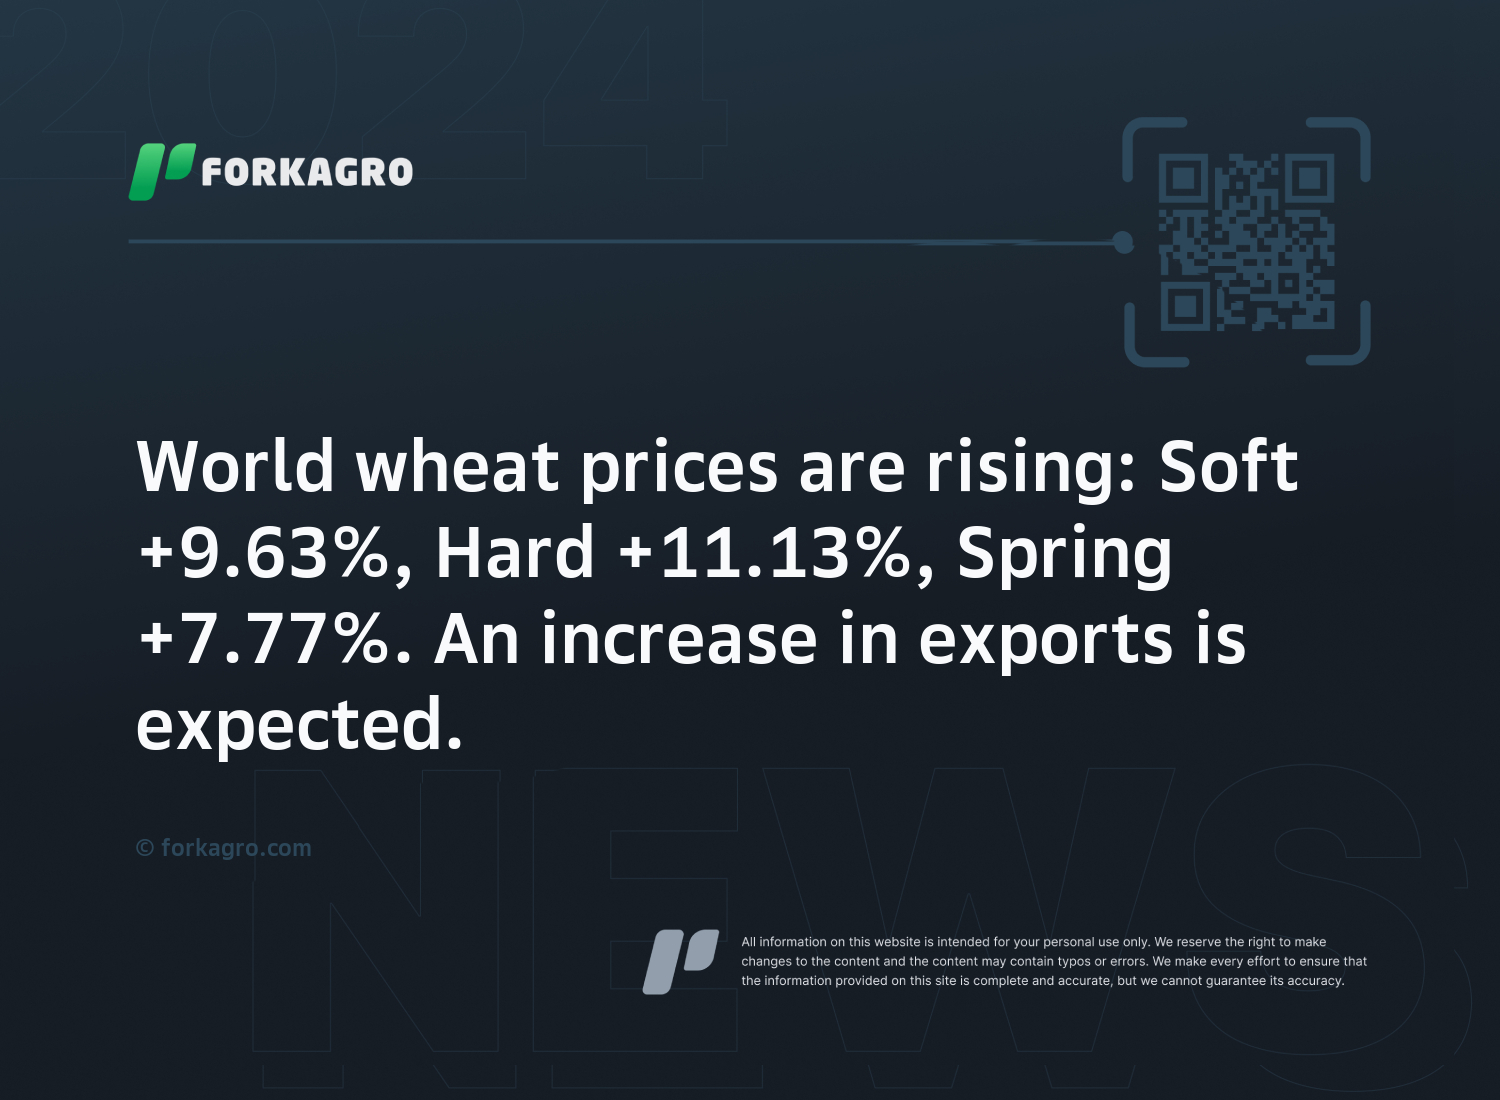 World wheat prices are rising: Soft +9.63%, Hard +11.13%, Spring +7.77%. An increase in exports is expected.